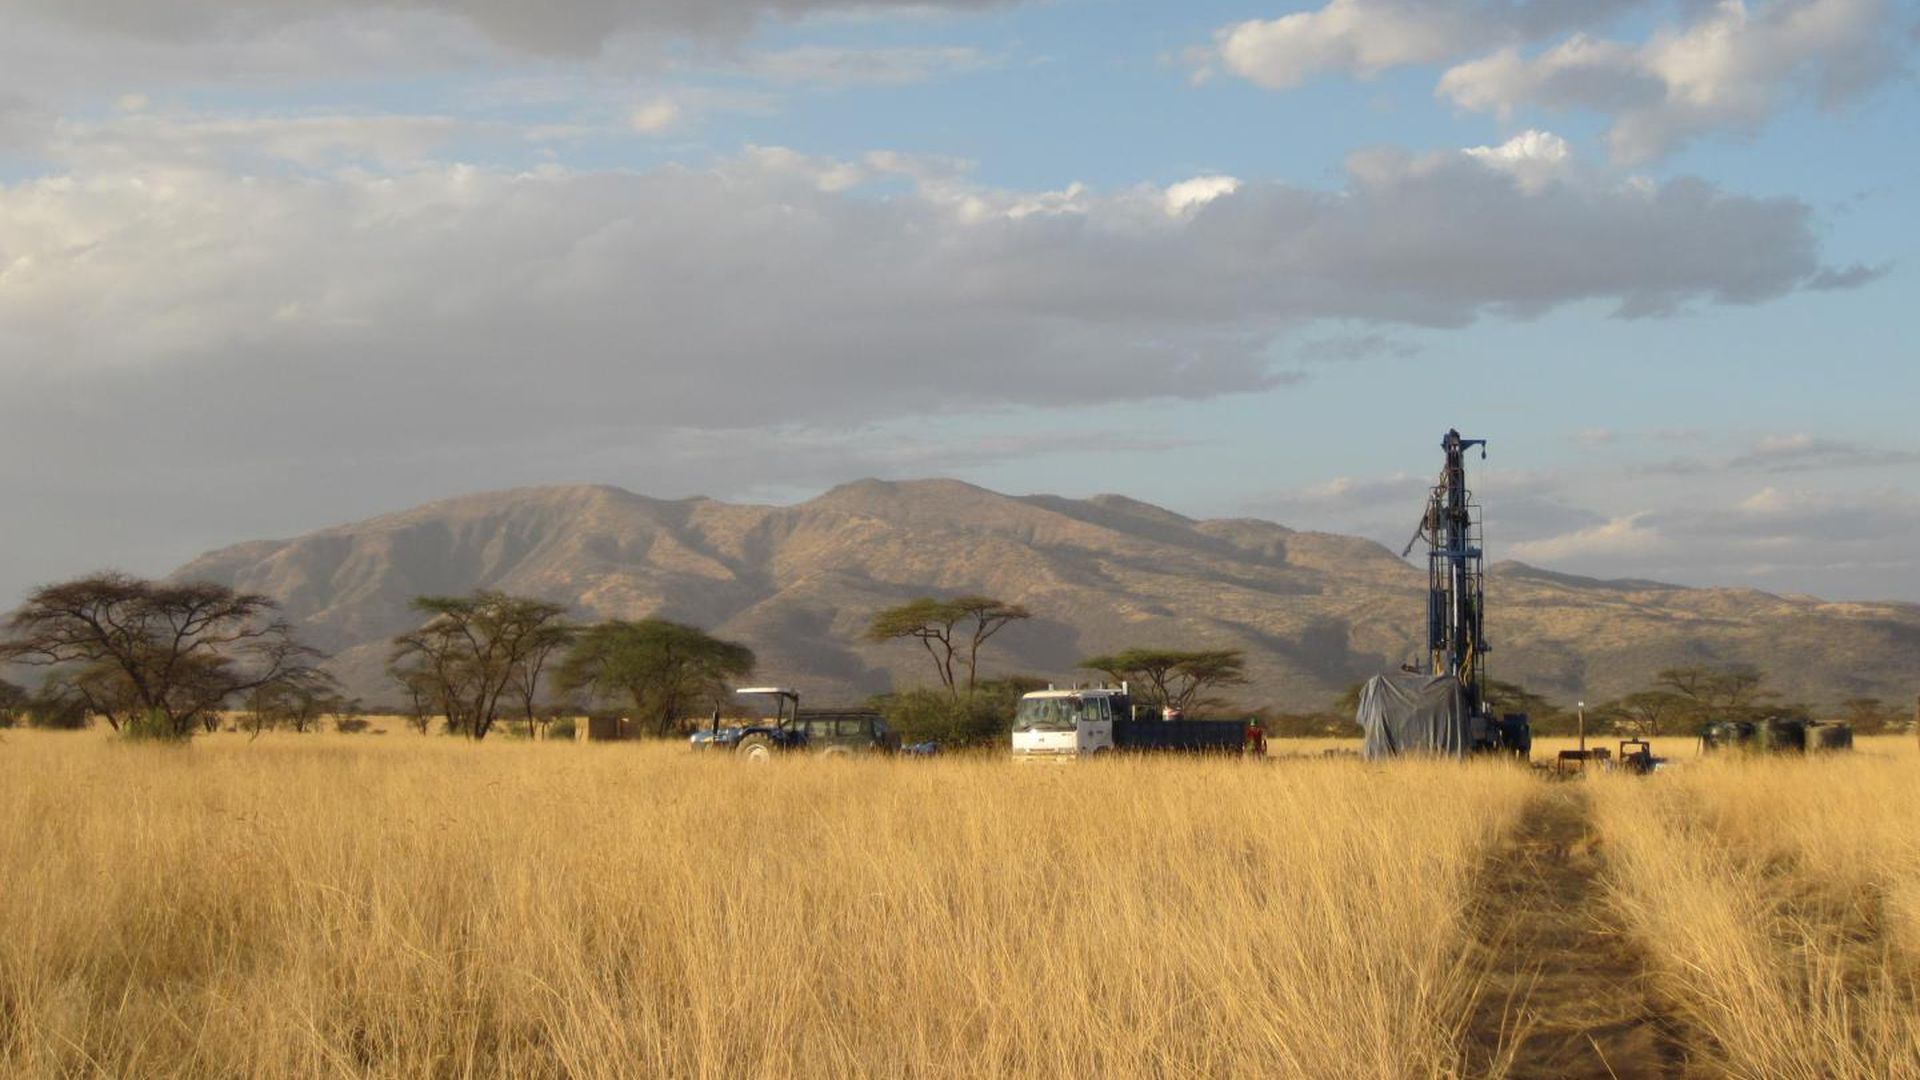 The drill site at the Koora Basin in Kenya.